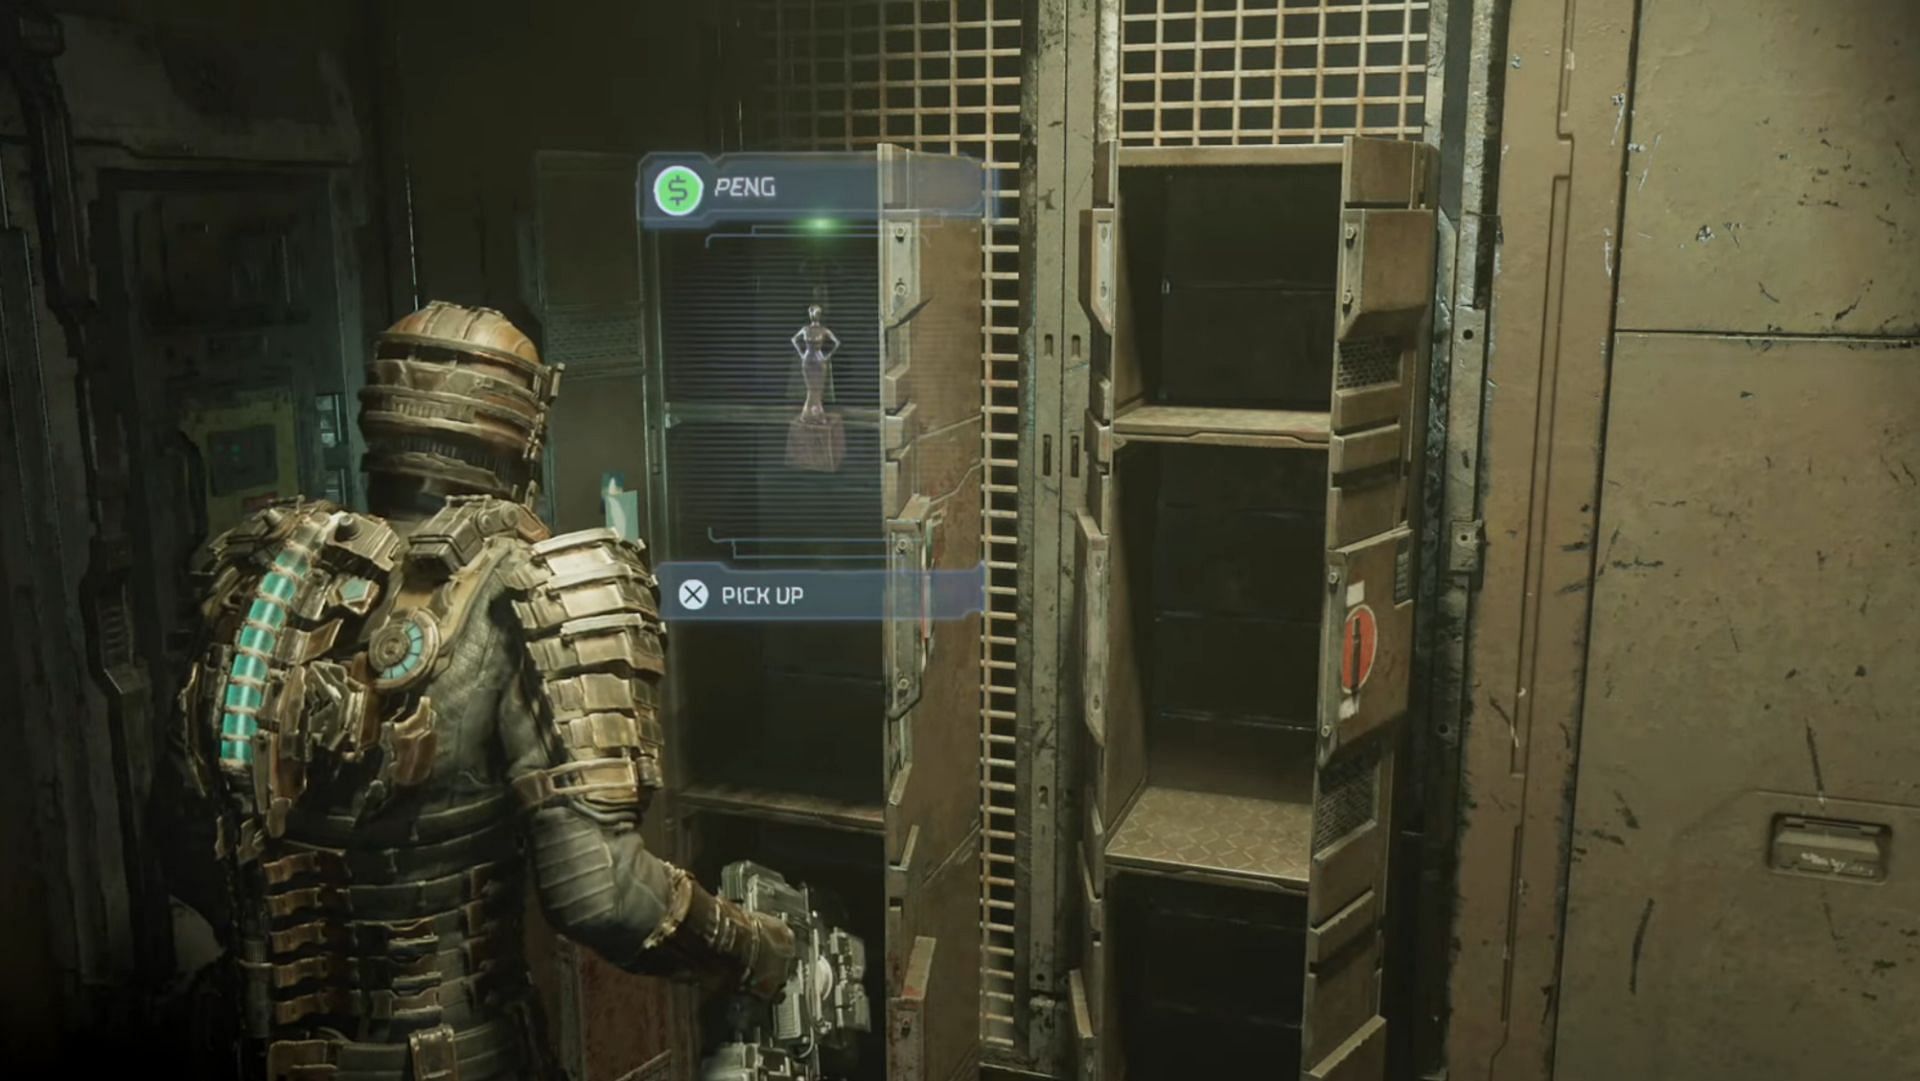 Dead Space has a lot of returning easter eggs, including the Peng Treasure (Image via YouTube/HarryNinetyFour)